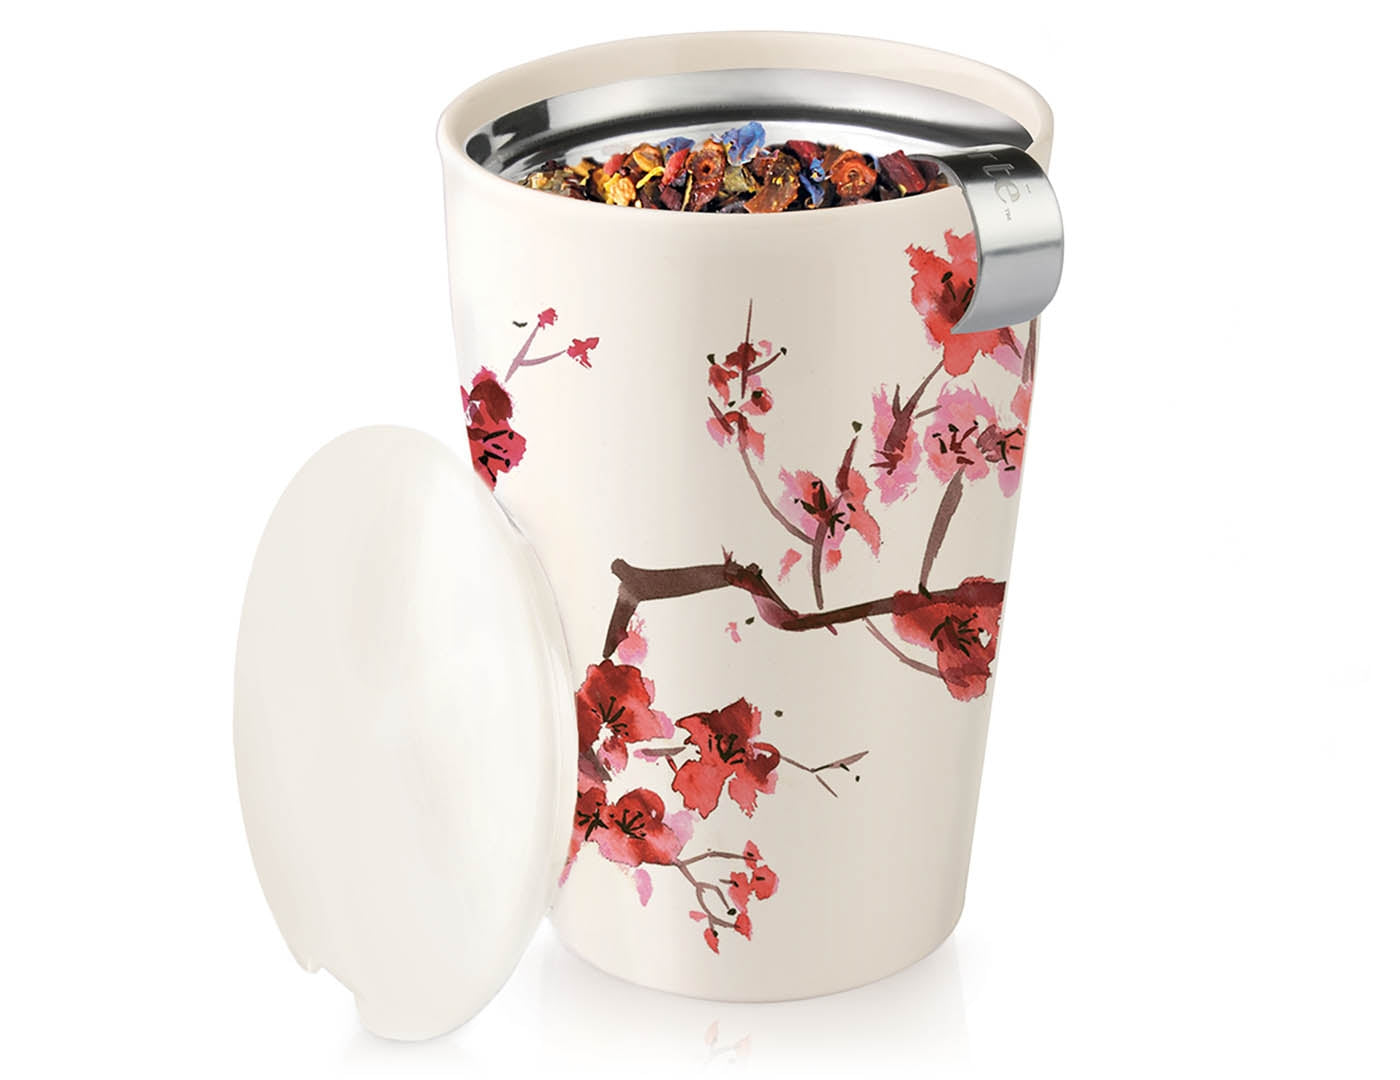 Cherry Blossom design KATI® Steeping cup with infuser showing stainless steel infuser with tea leaves